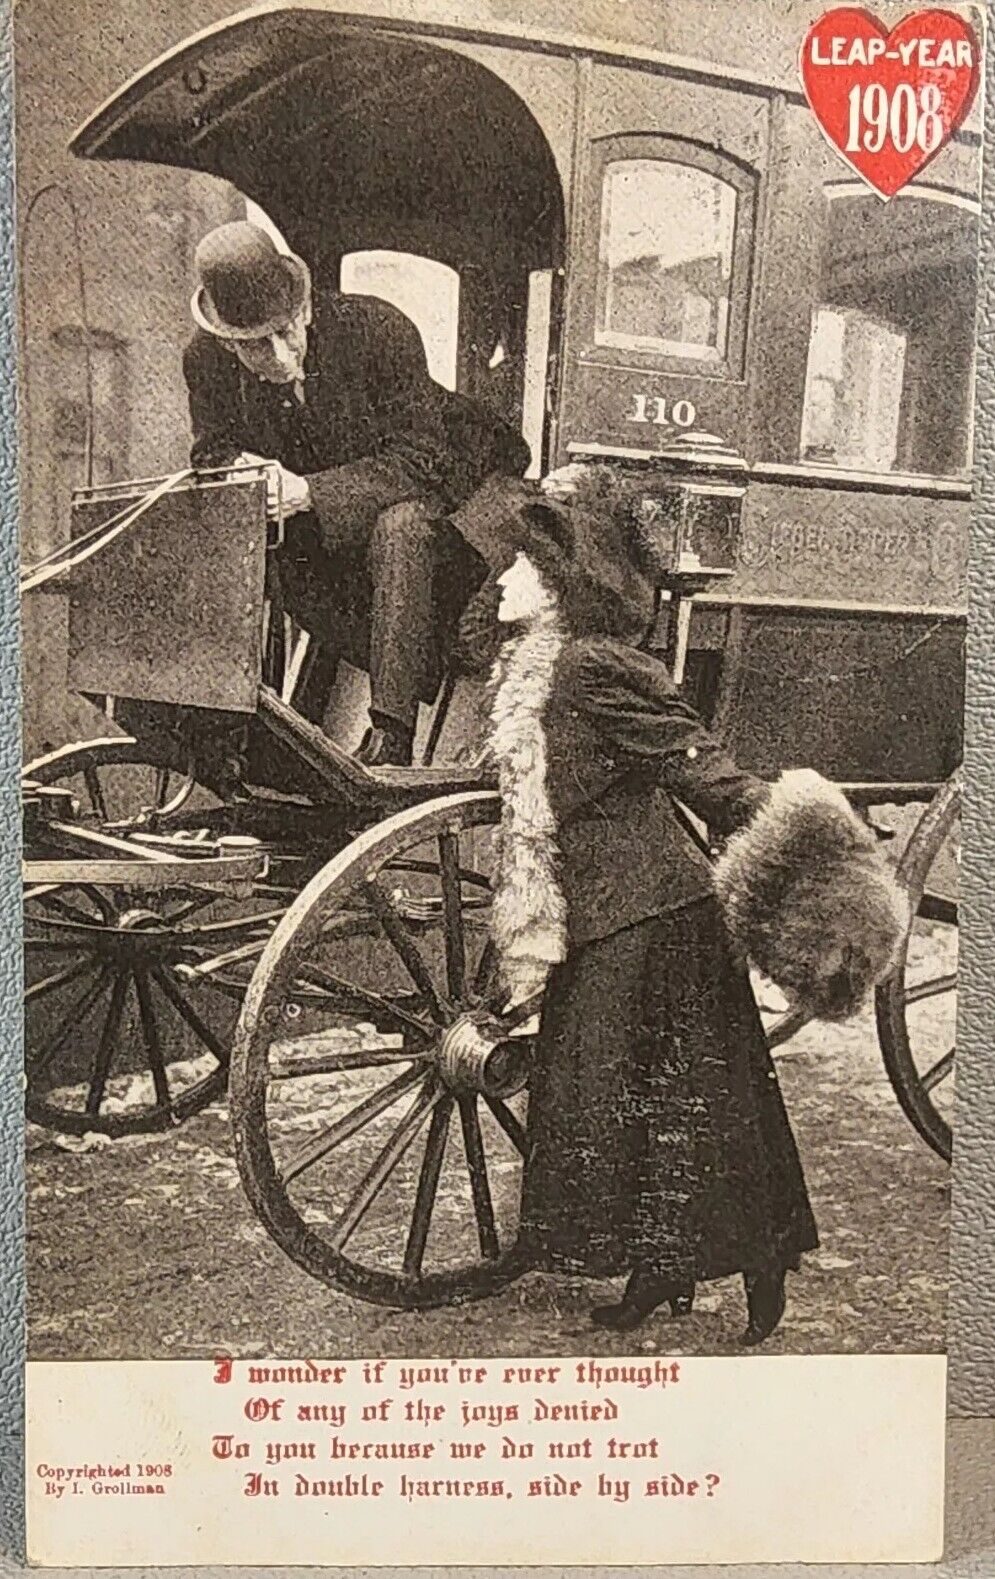 1908 LEAP YEAR Comic Postcard Woman Talking to Driver of Horse Wagon. #-4724